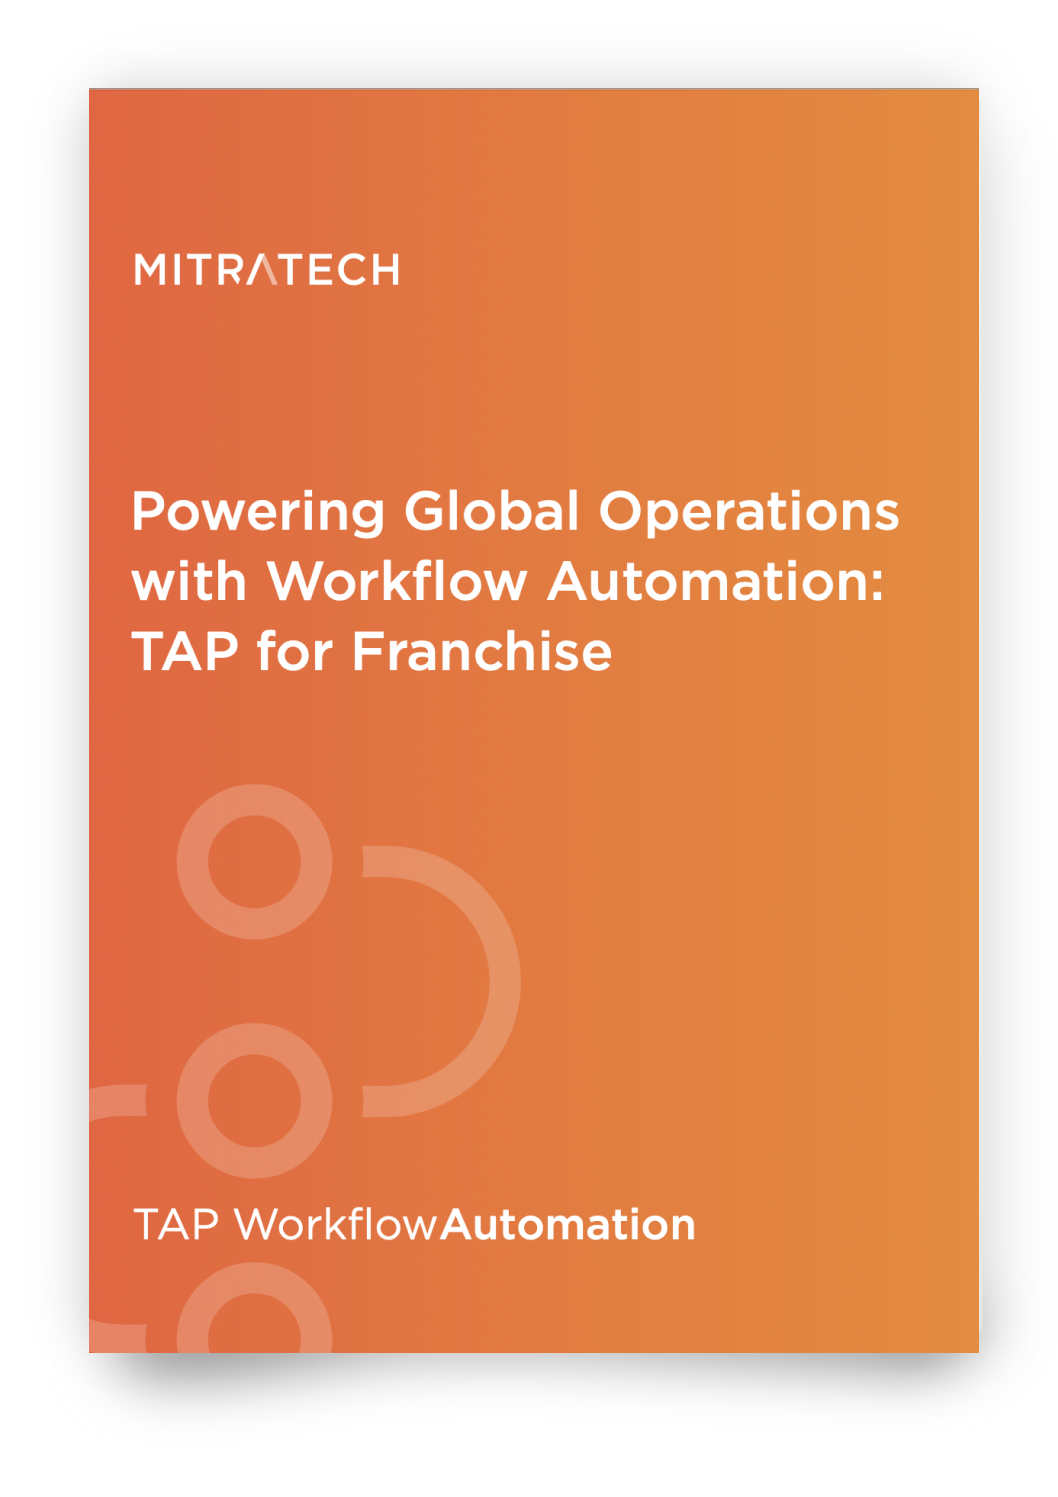 Download the TAP Brochure to explore Global Operation Automation